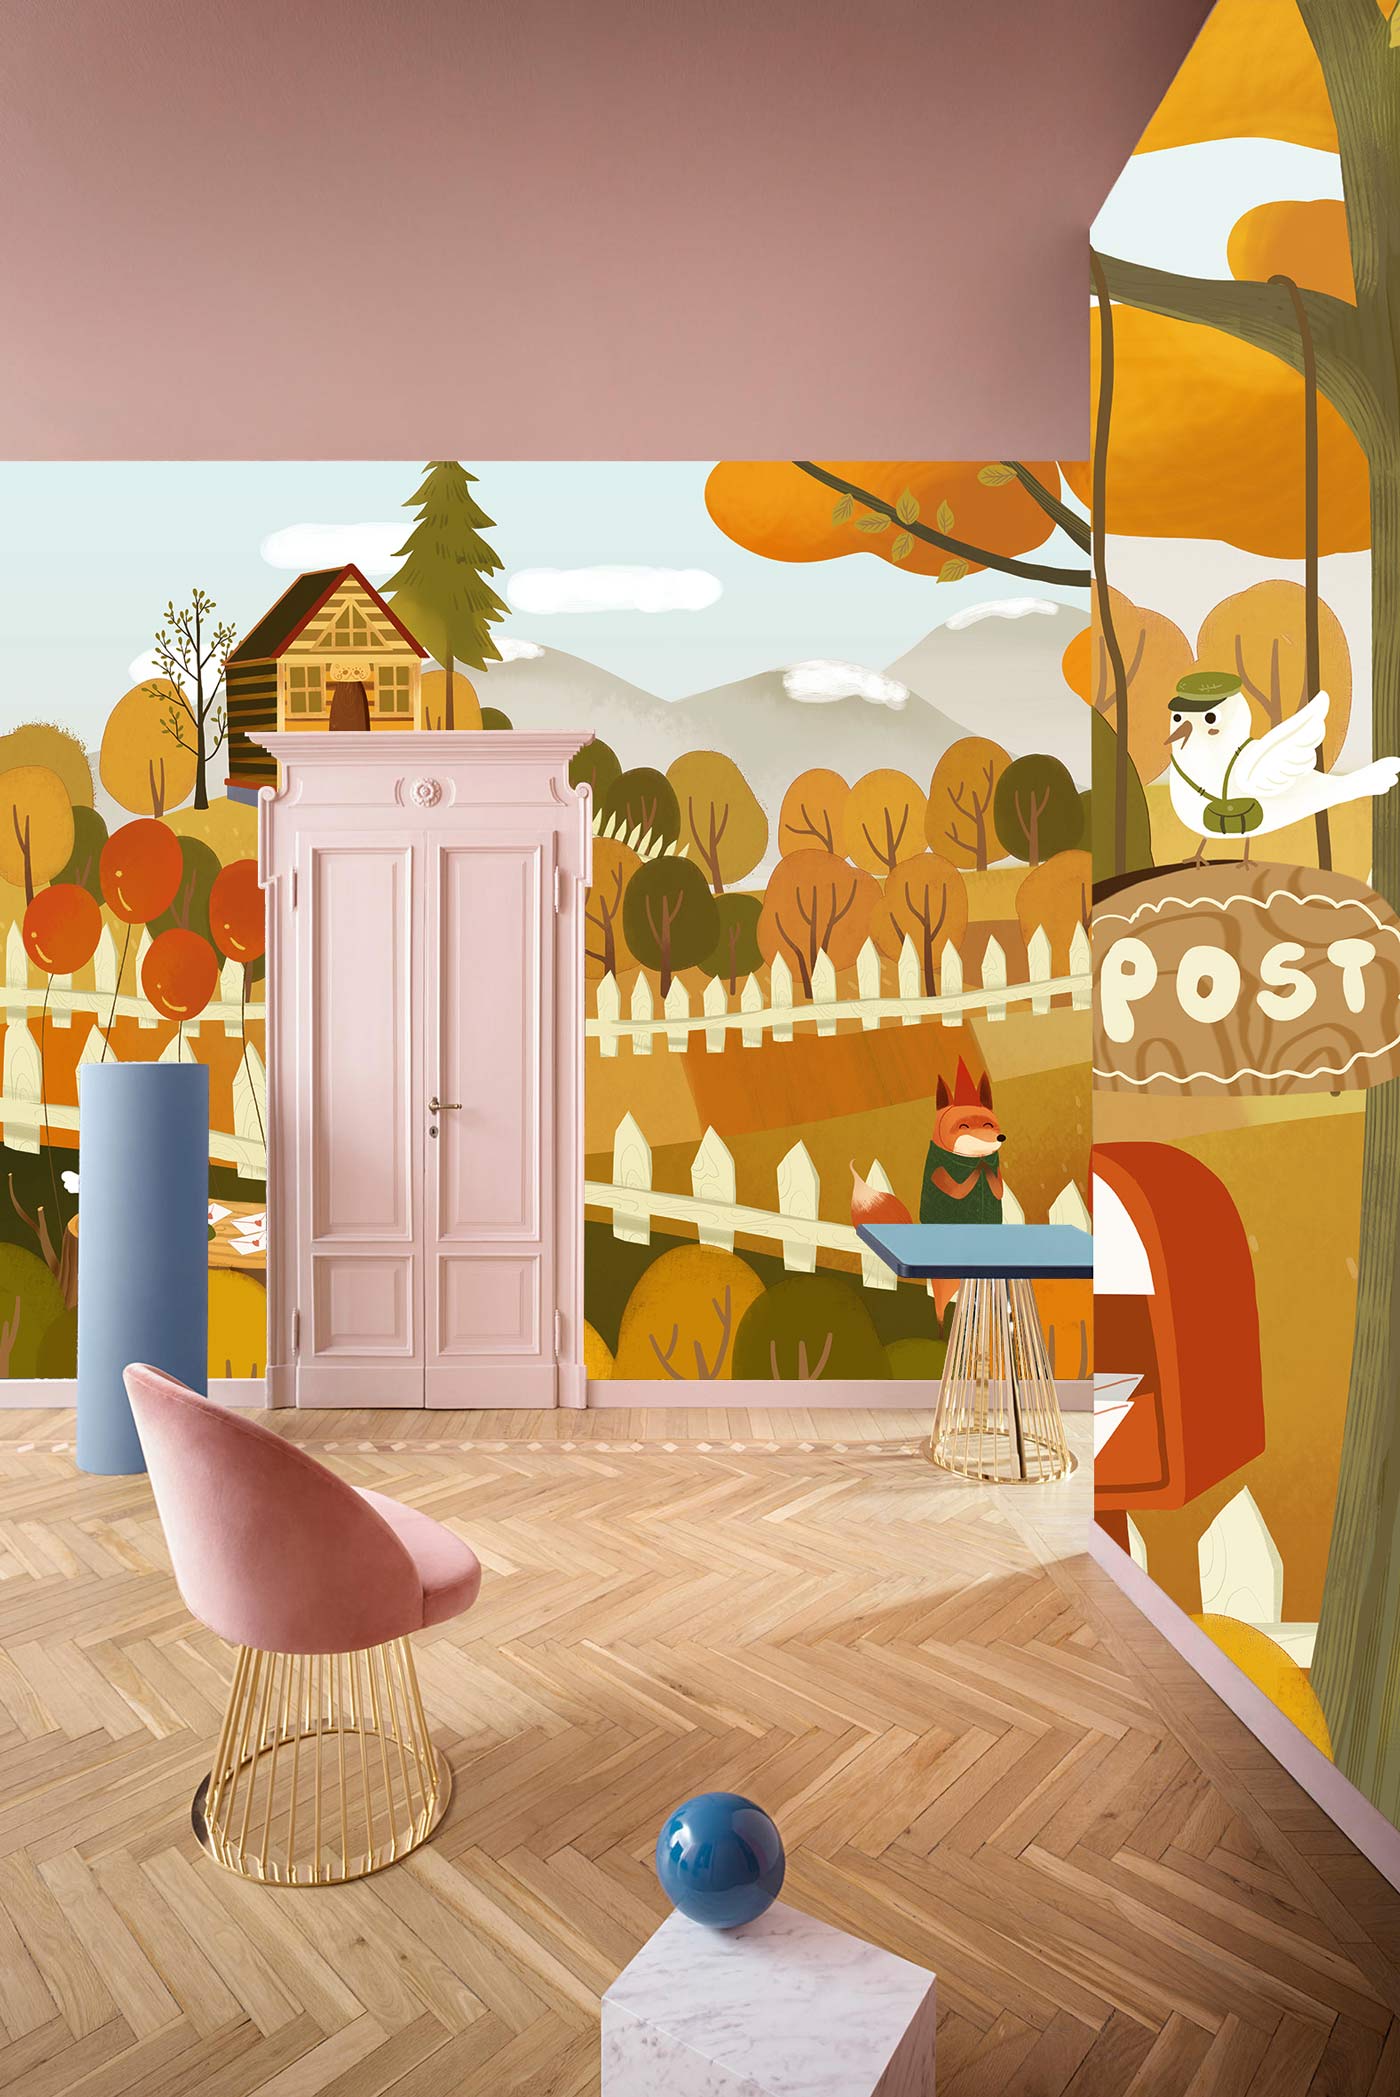 Free AI art images of quirky postman